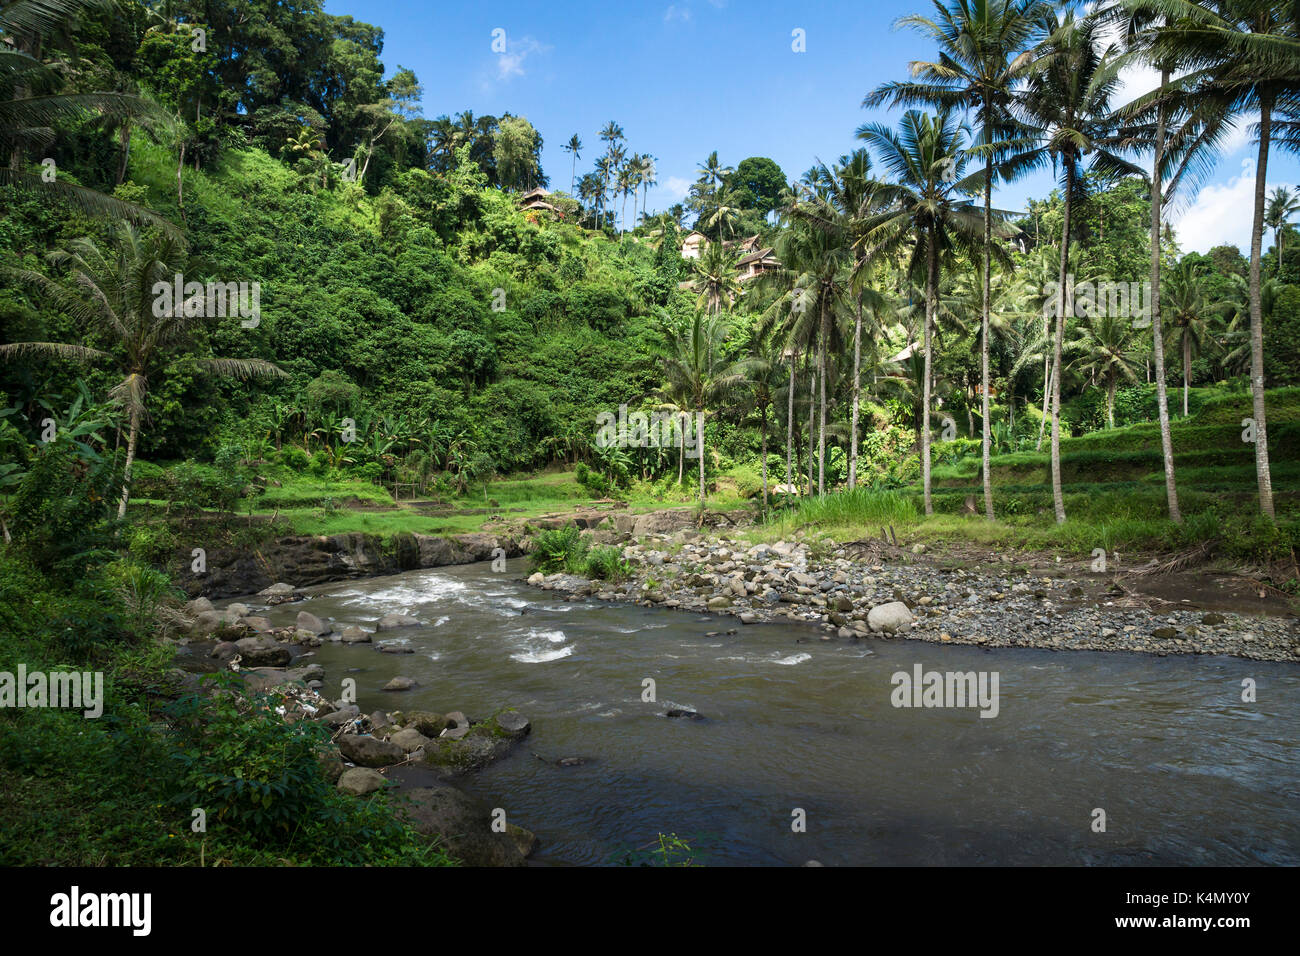 Sayan terraces with river, terraced ricefields, Ubud, Bali, Indonesia Stock Photo